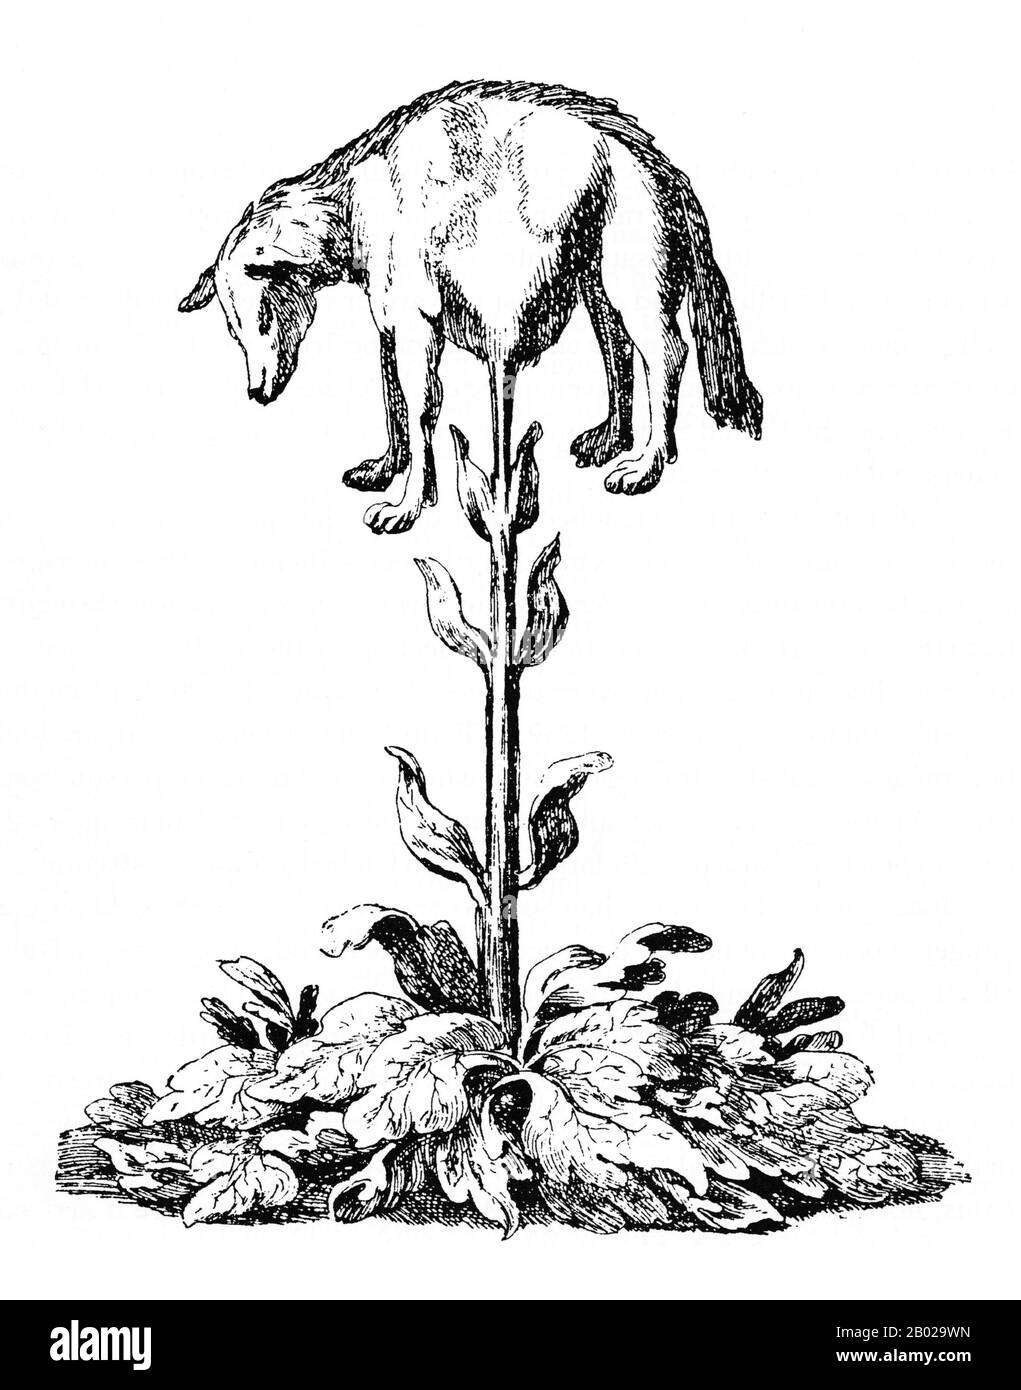 The Vegetable Lamb of Tartary (Latin: Agnus scythicus or Planta Tartarica Barometz) is a legendary zoophyte of Central Asia, once believed to grow sheep as its fruit.  The sheep were connected to the plant by an umbilical cord and grazed the land around the plant. When all the plants were gone, both the plant and sheep died. Stock Photo